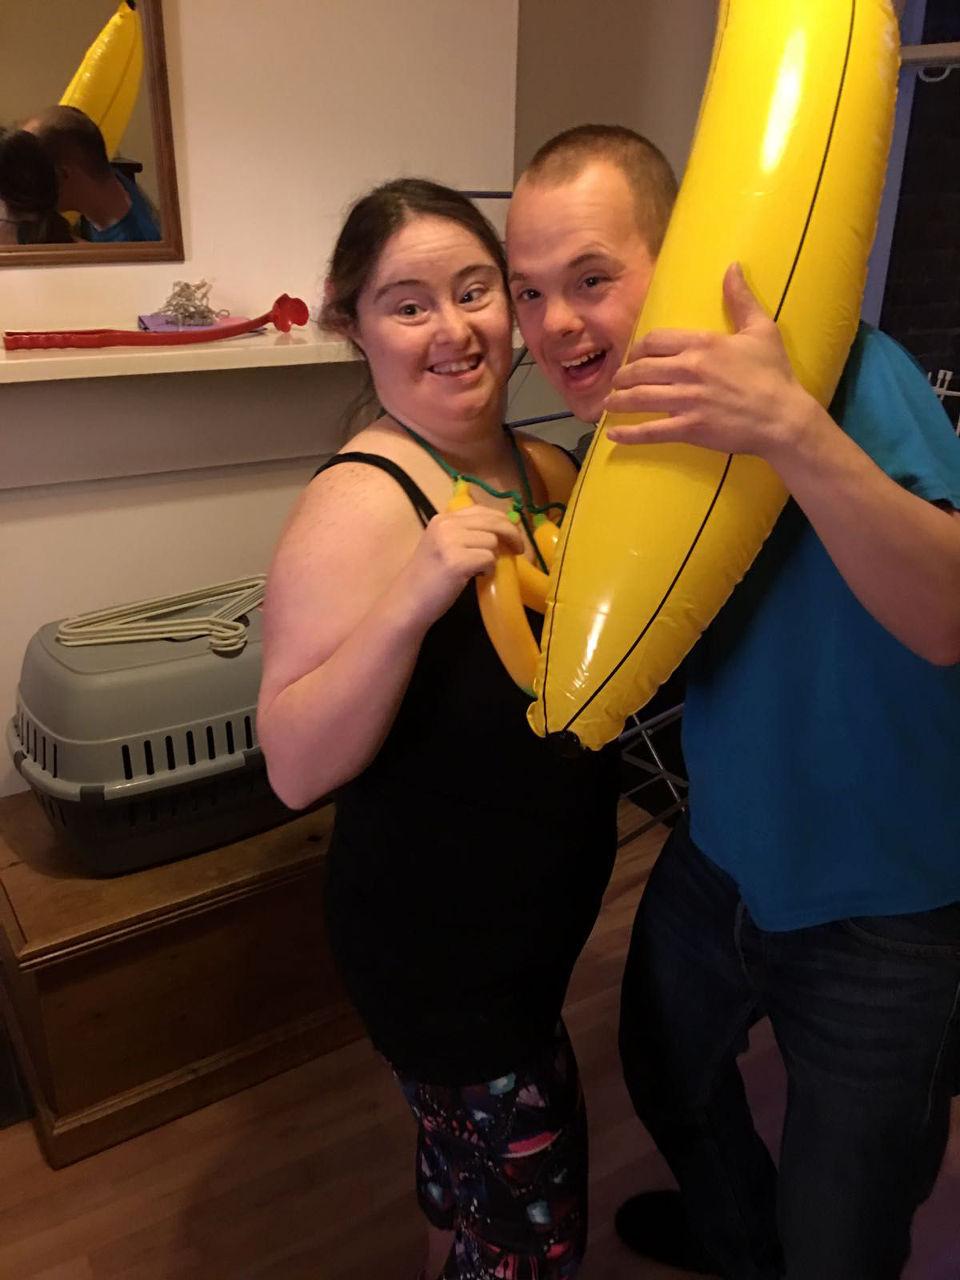 Sam and Hilly holding a blow-up banana.